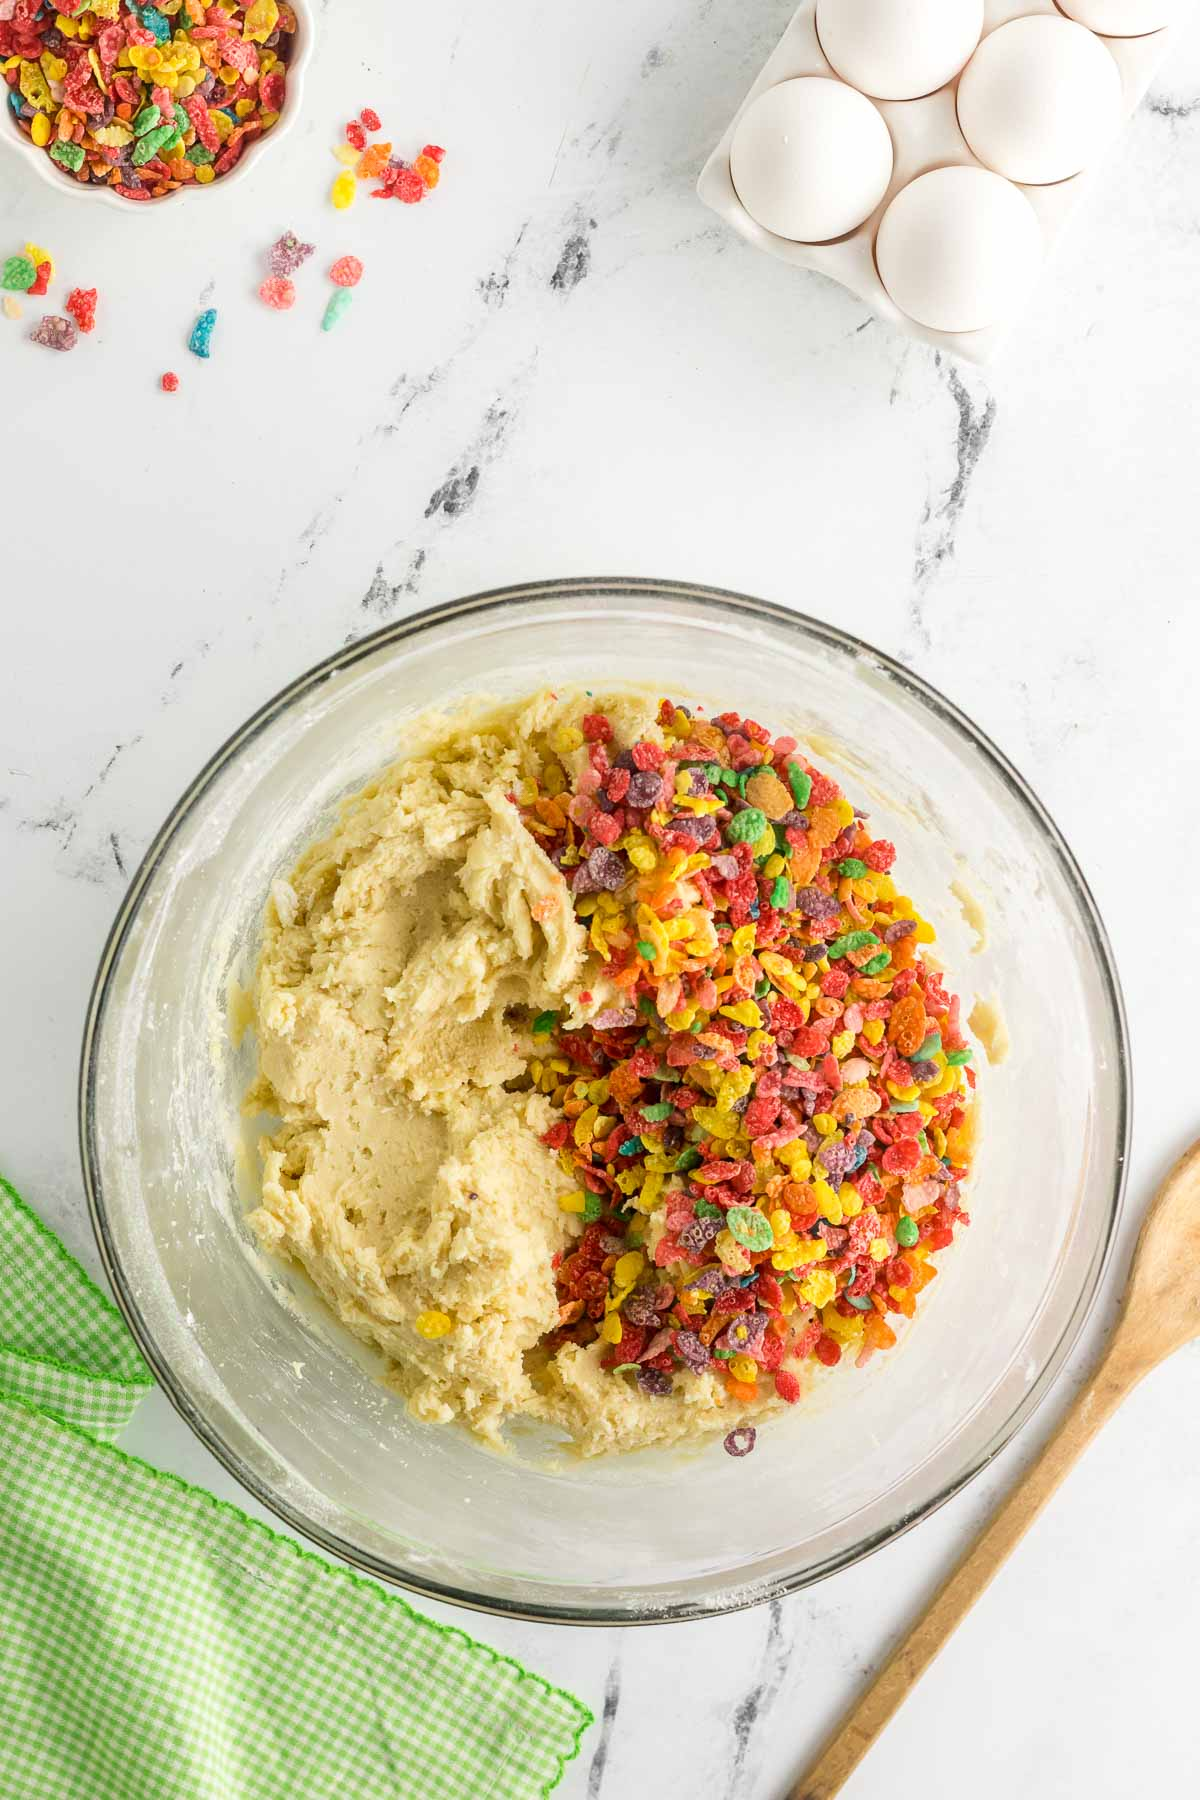 fruity pebbles cereal added to sugar cookie dough